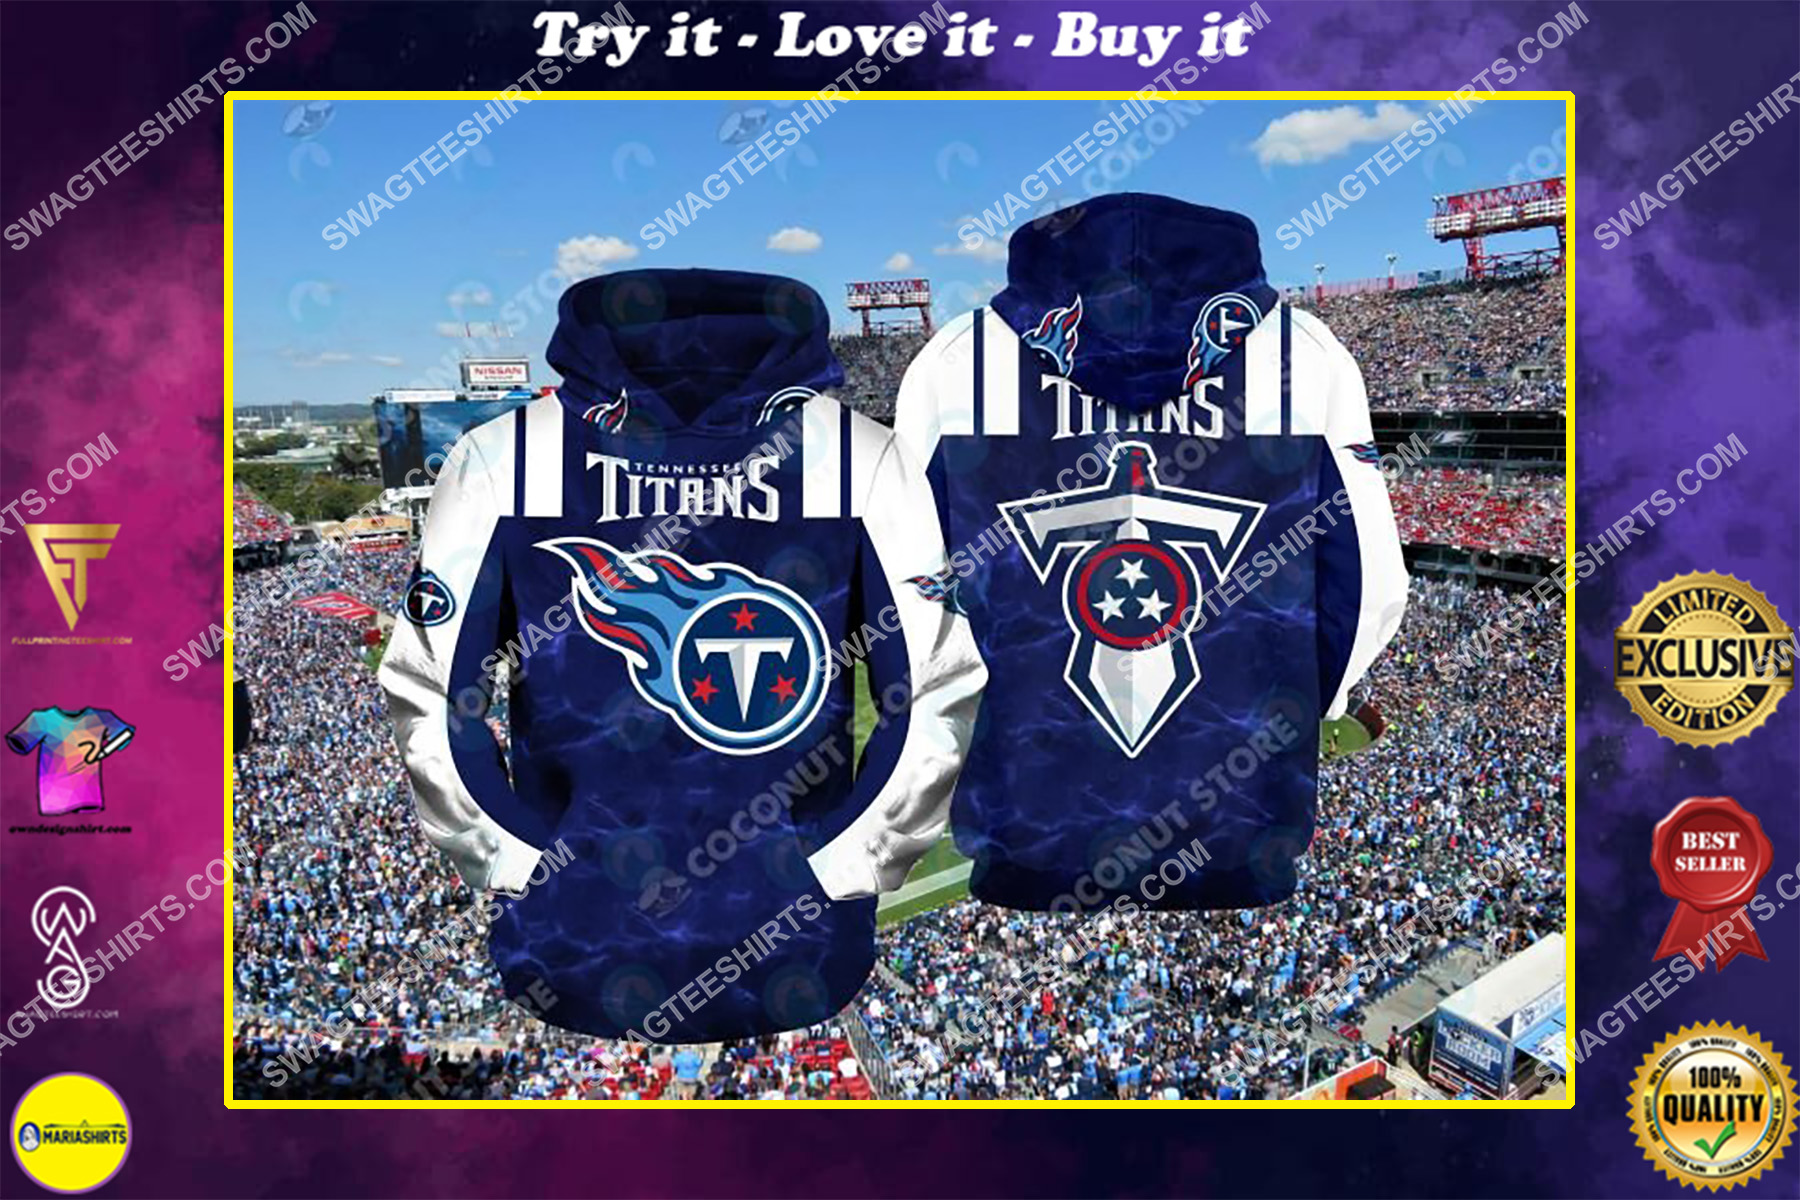 american football team tennessee titans all over printed shirt